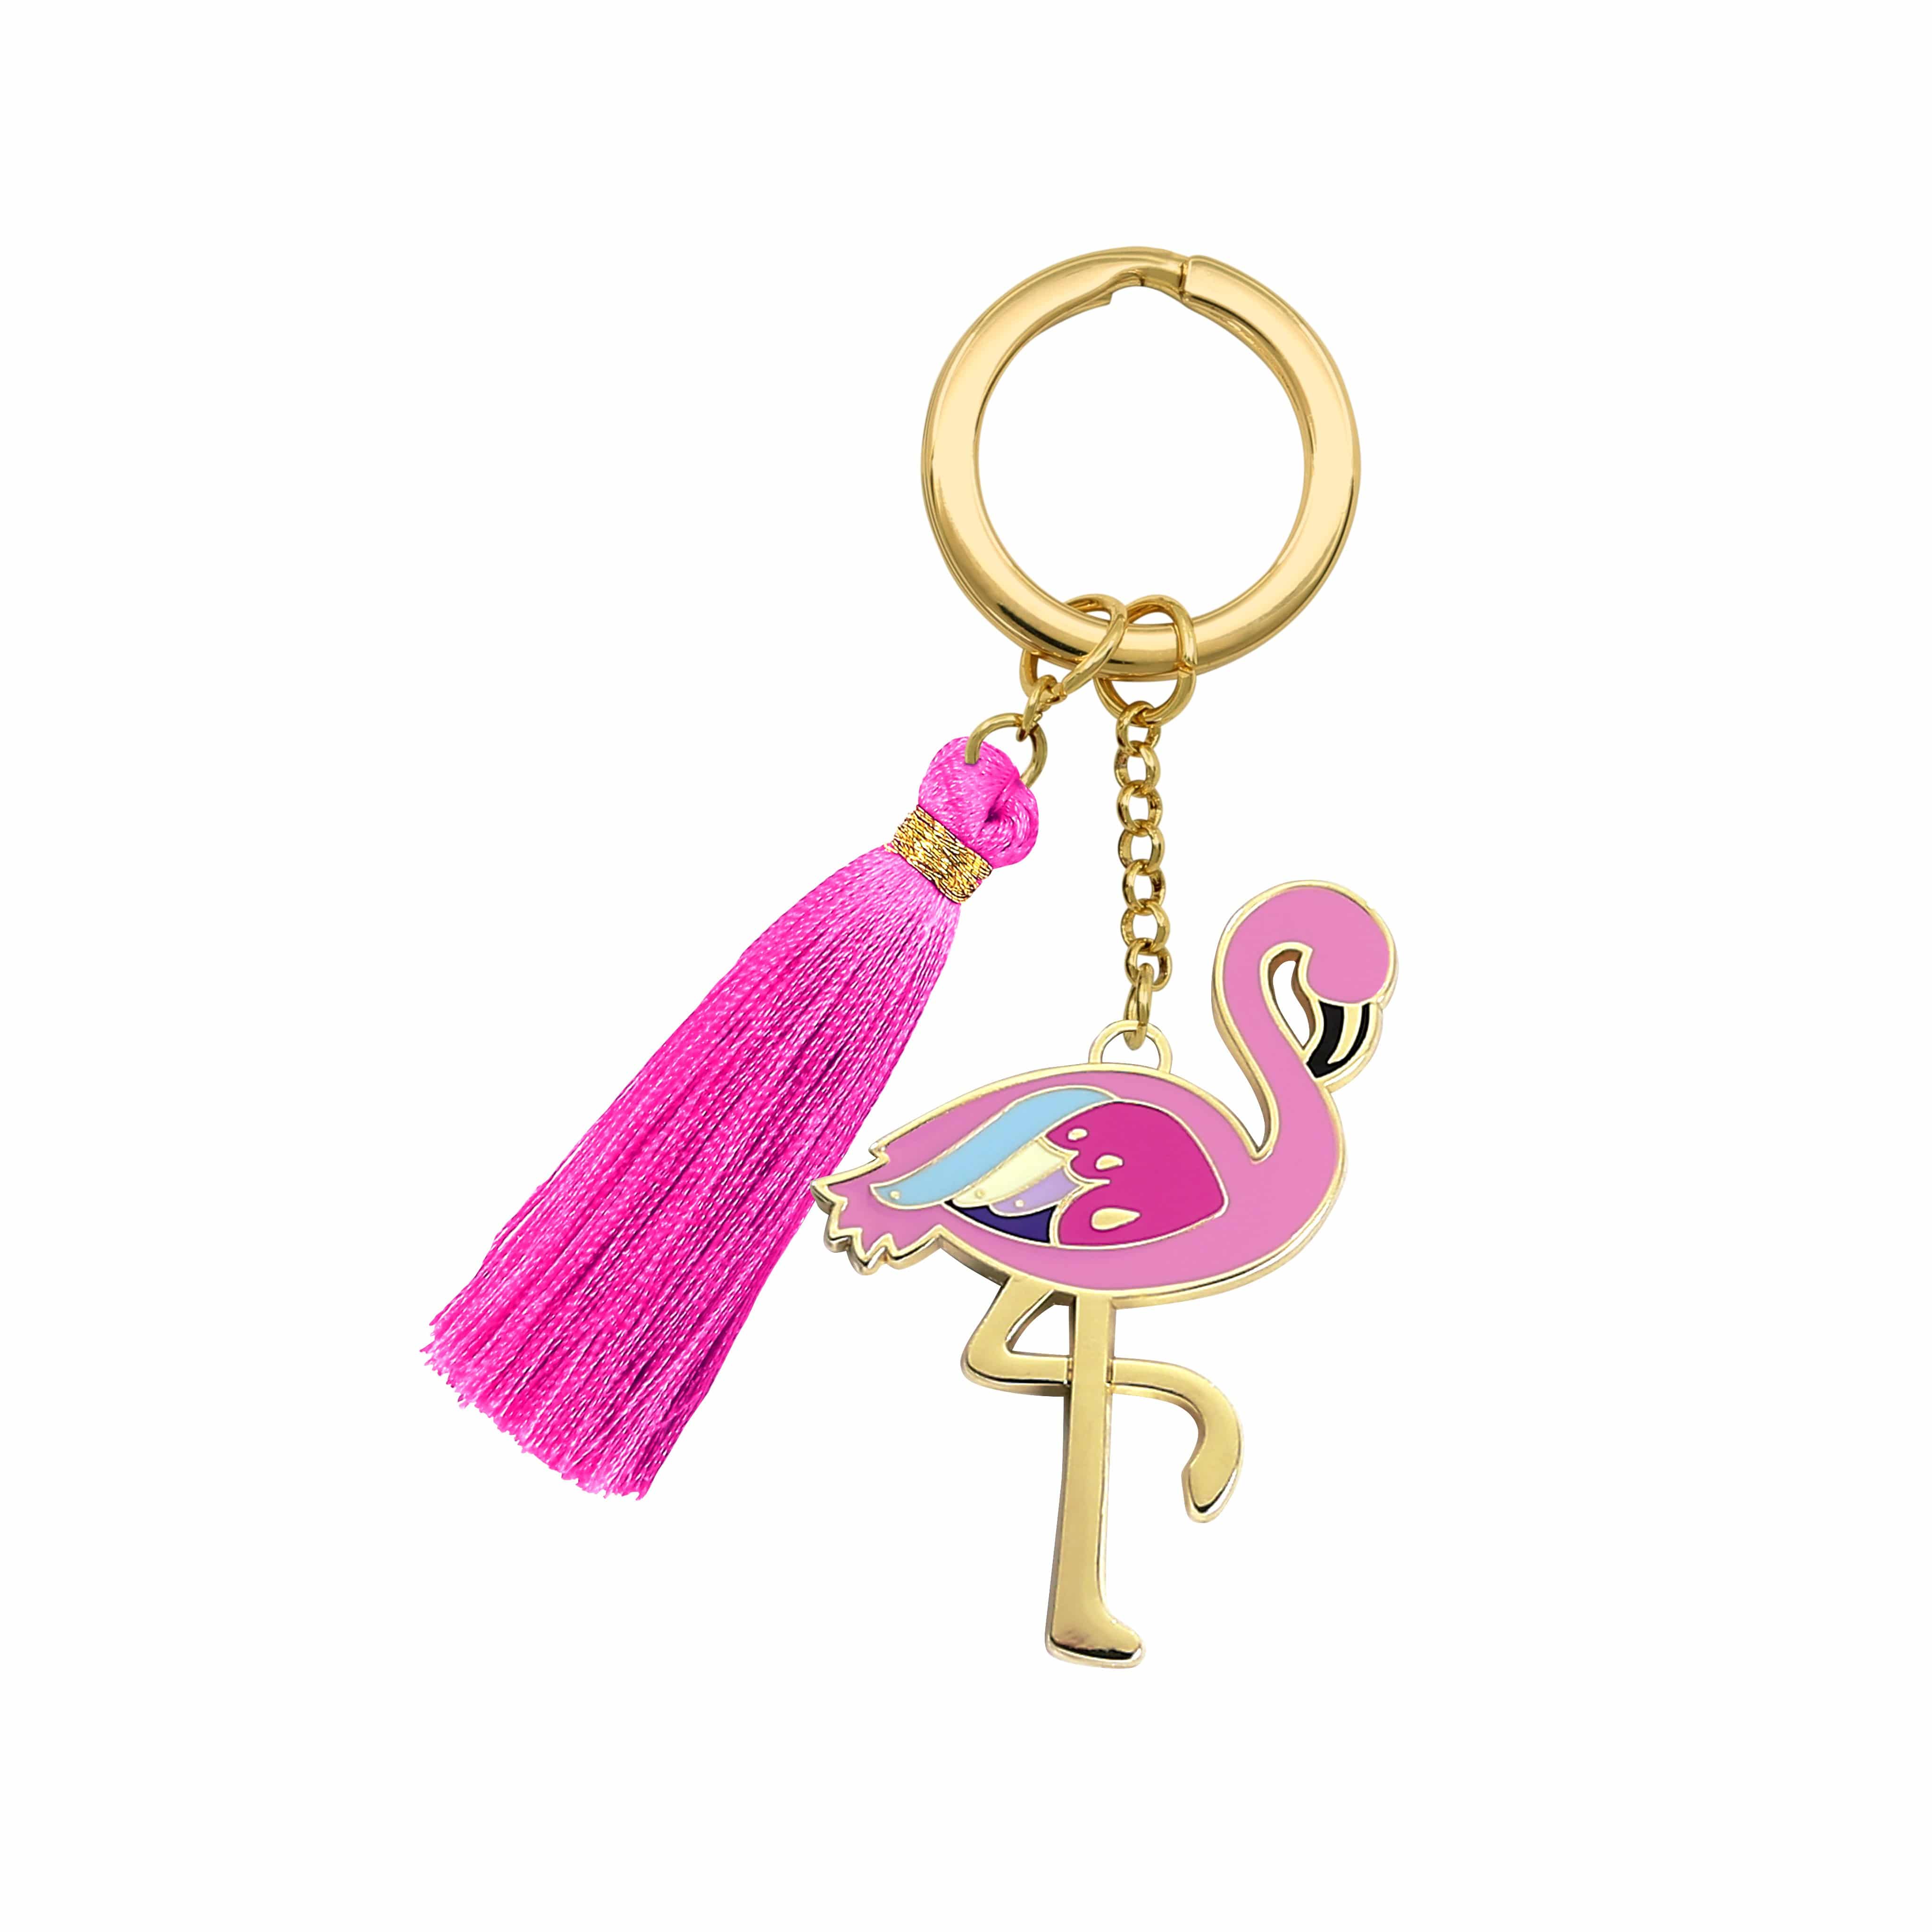 Beyond Charms Keychain - Flamingo - Coco Gifts Shop Online